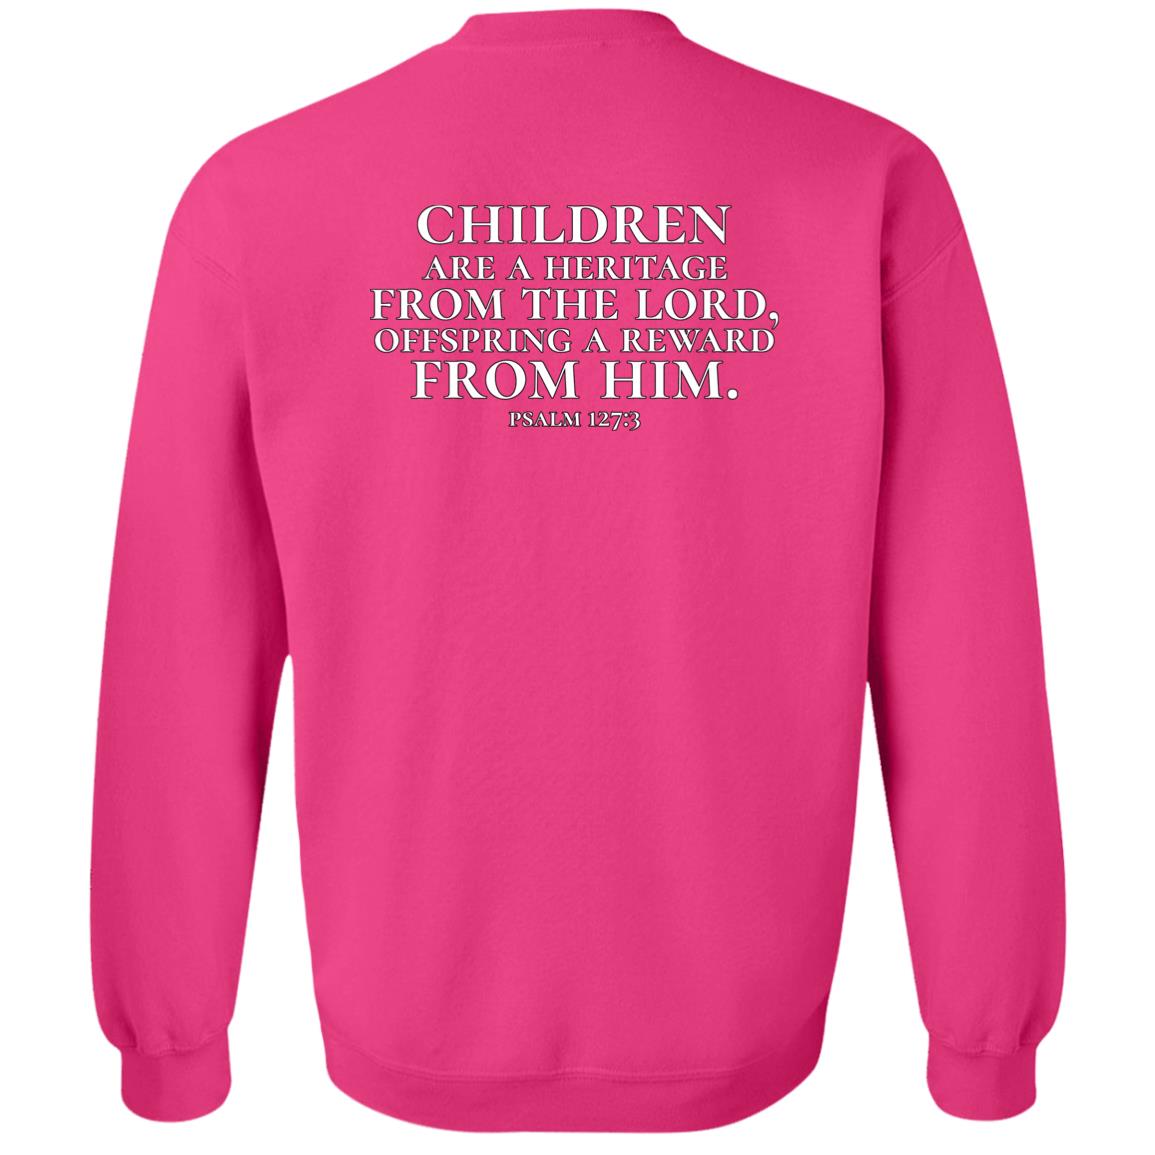 Why We Protect Our Children (Unisex Sweatshirt)